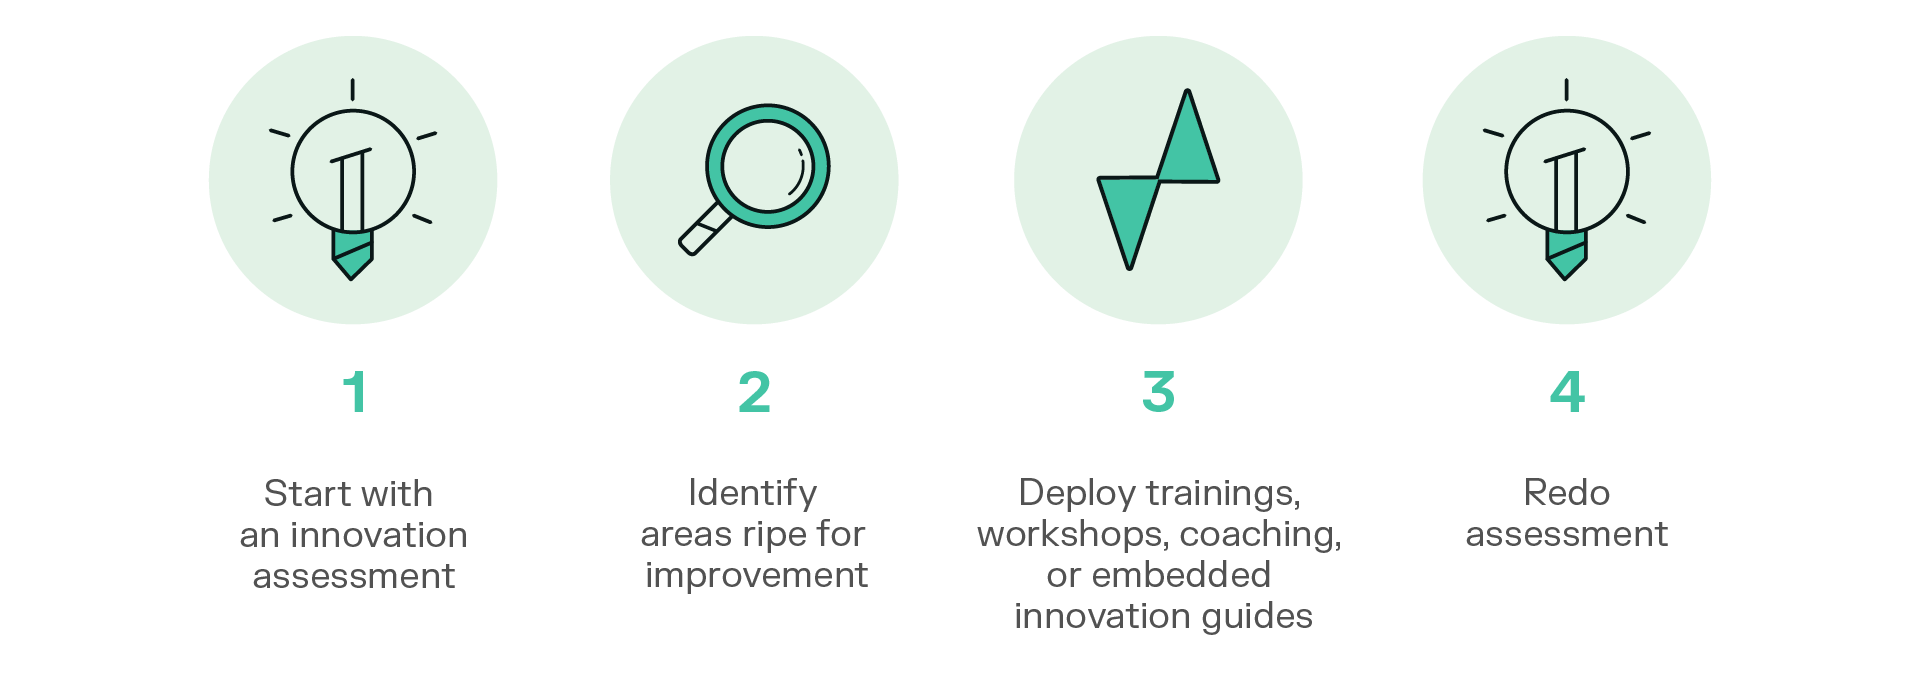 Delve’s Innovation Enablement Process. Step 1, Start with an innovation assessment. Step 2, Identify areas ripe for improvement. Step 3, Deploy trainings, workshops, coaching, or embedded innovation guides. Step 4, Redo assessment.